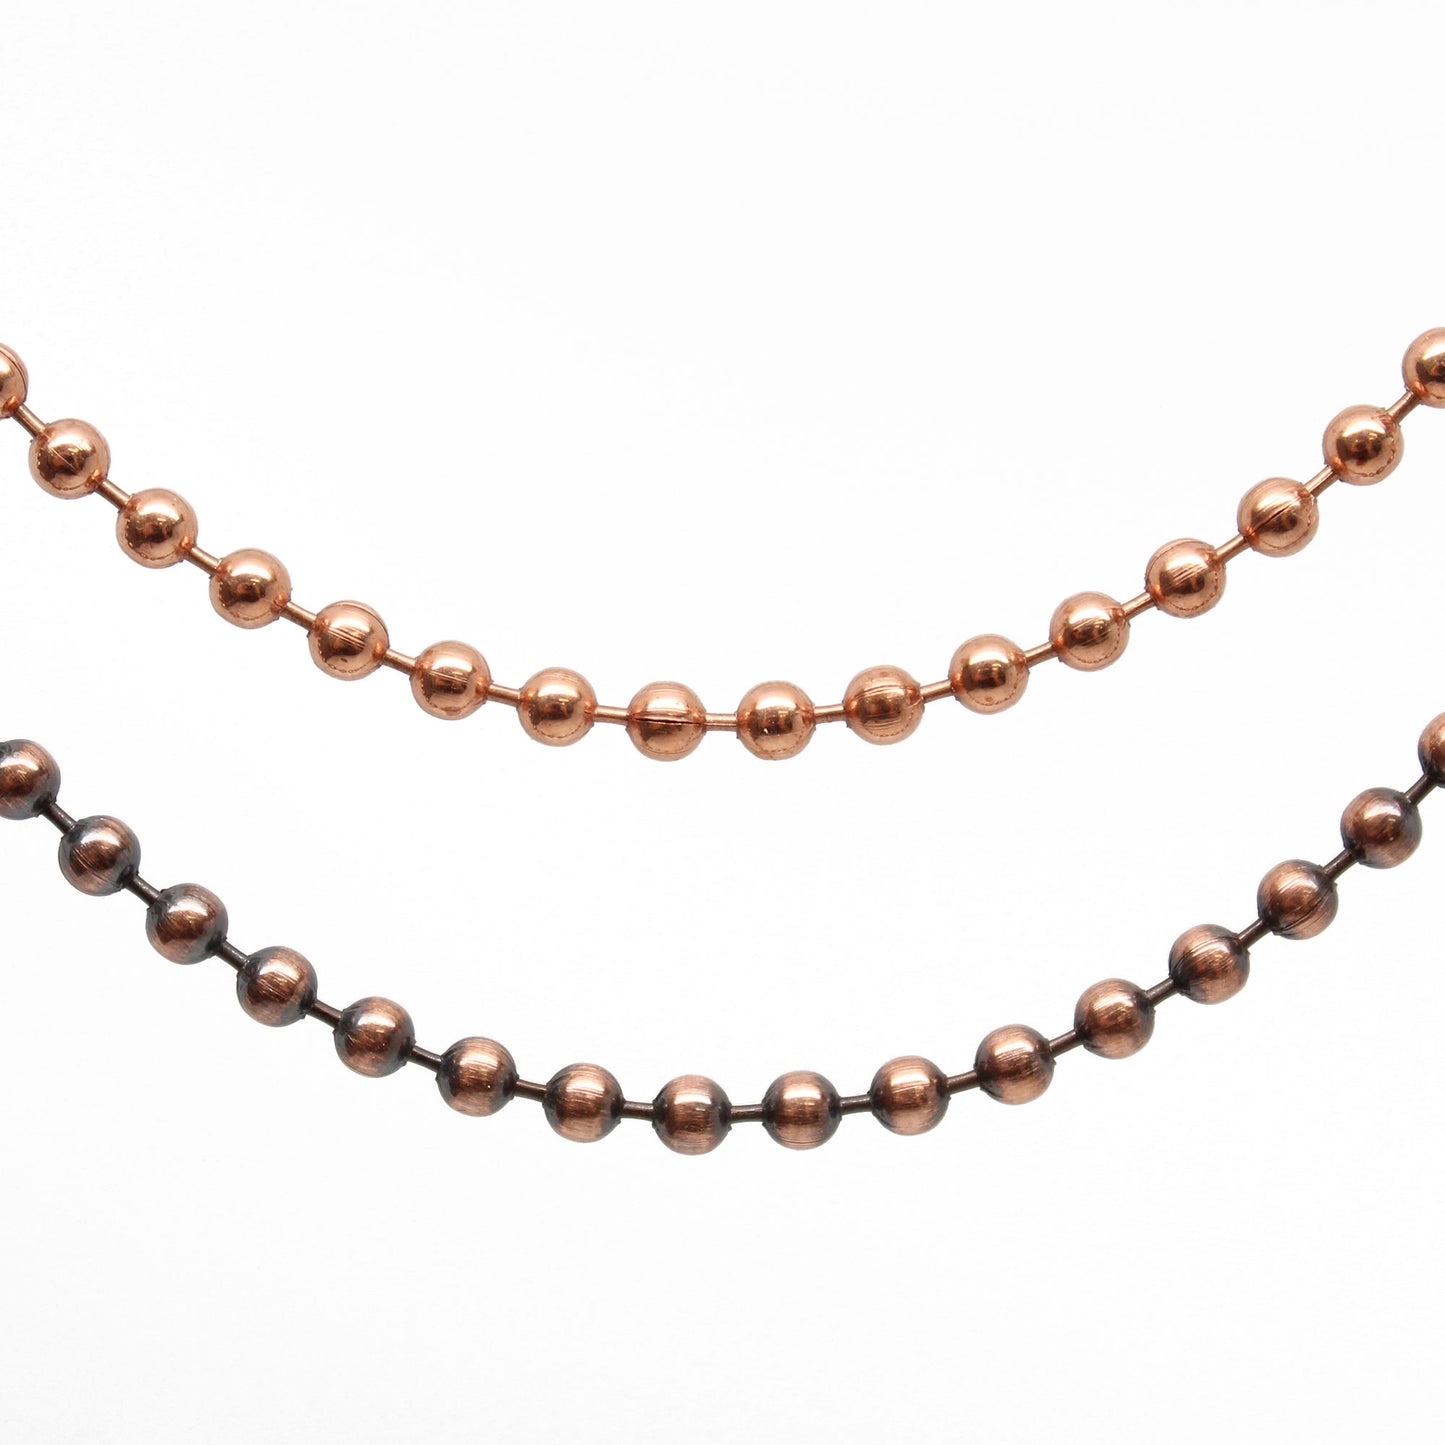 Copper Bead Ball Chain Bracelet or Necklace, 3.2mm